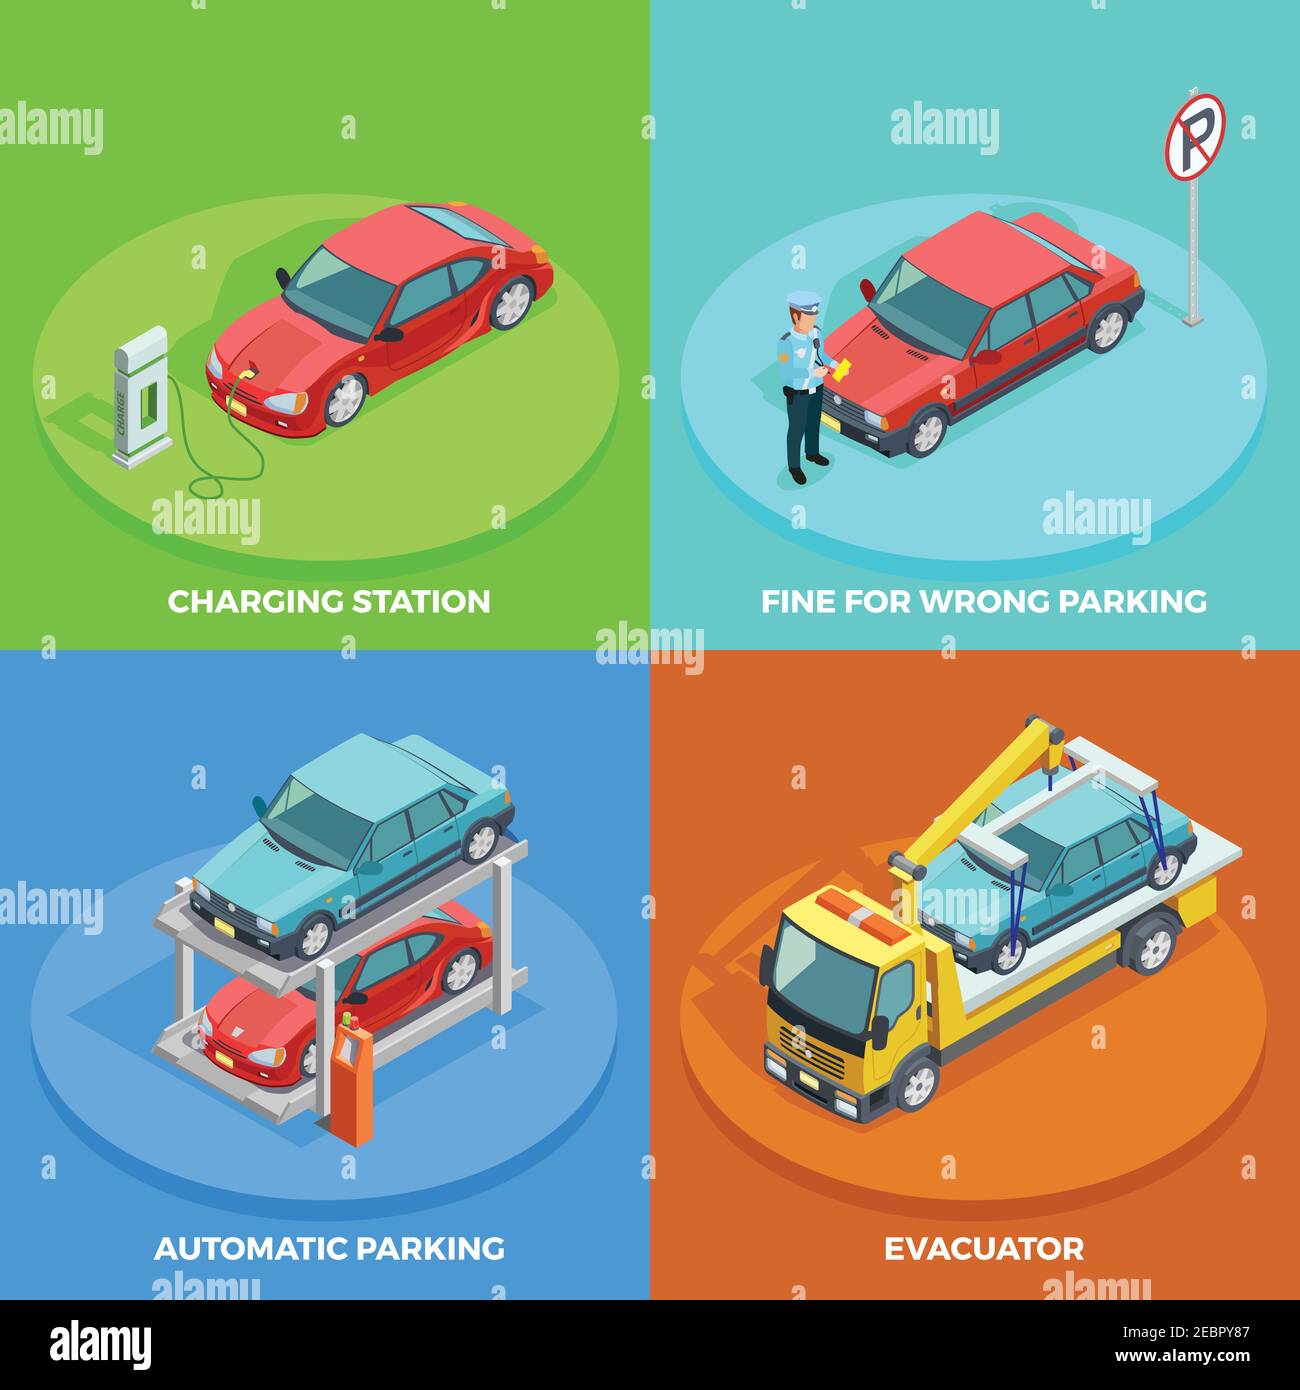 Parking isometric collection with cars stopped in right and wrong positions vector illustration Stock Vector